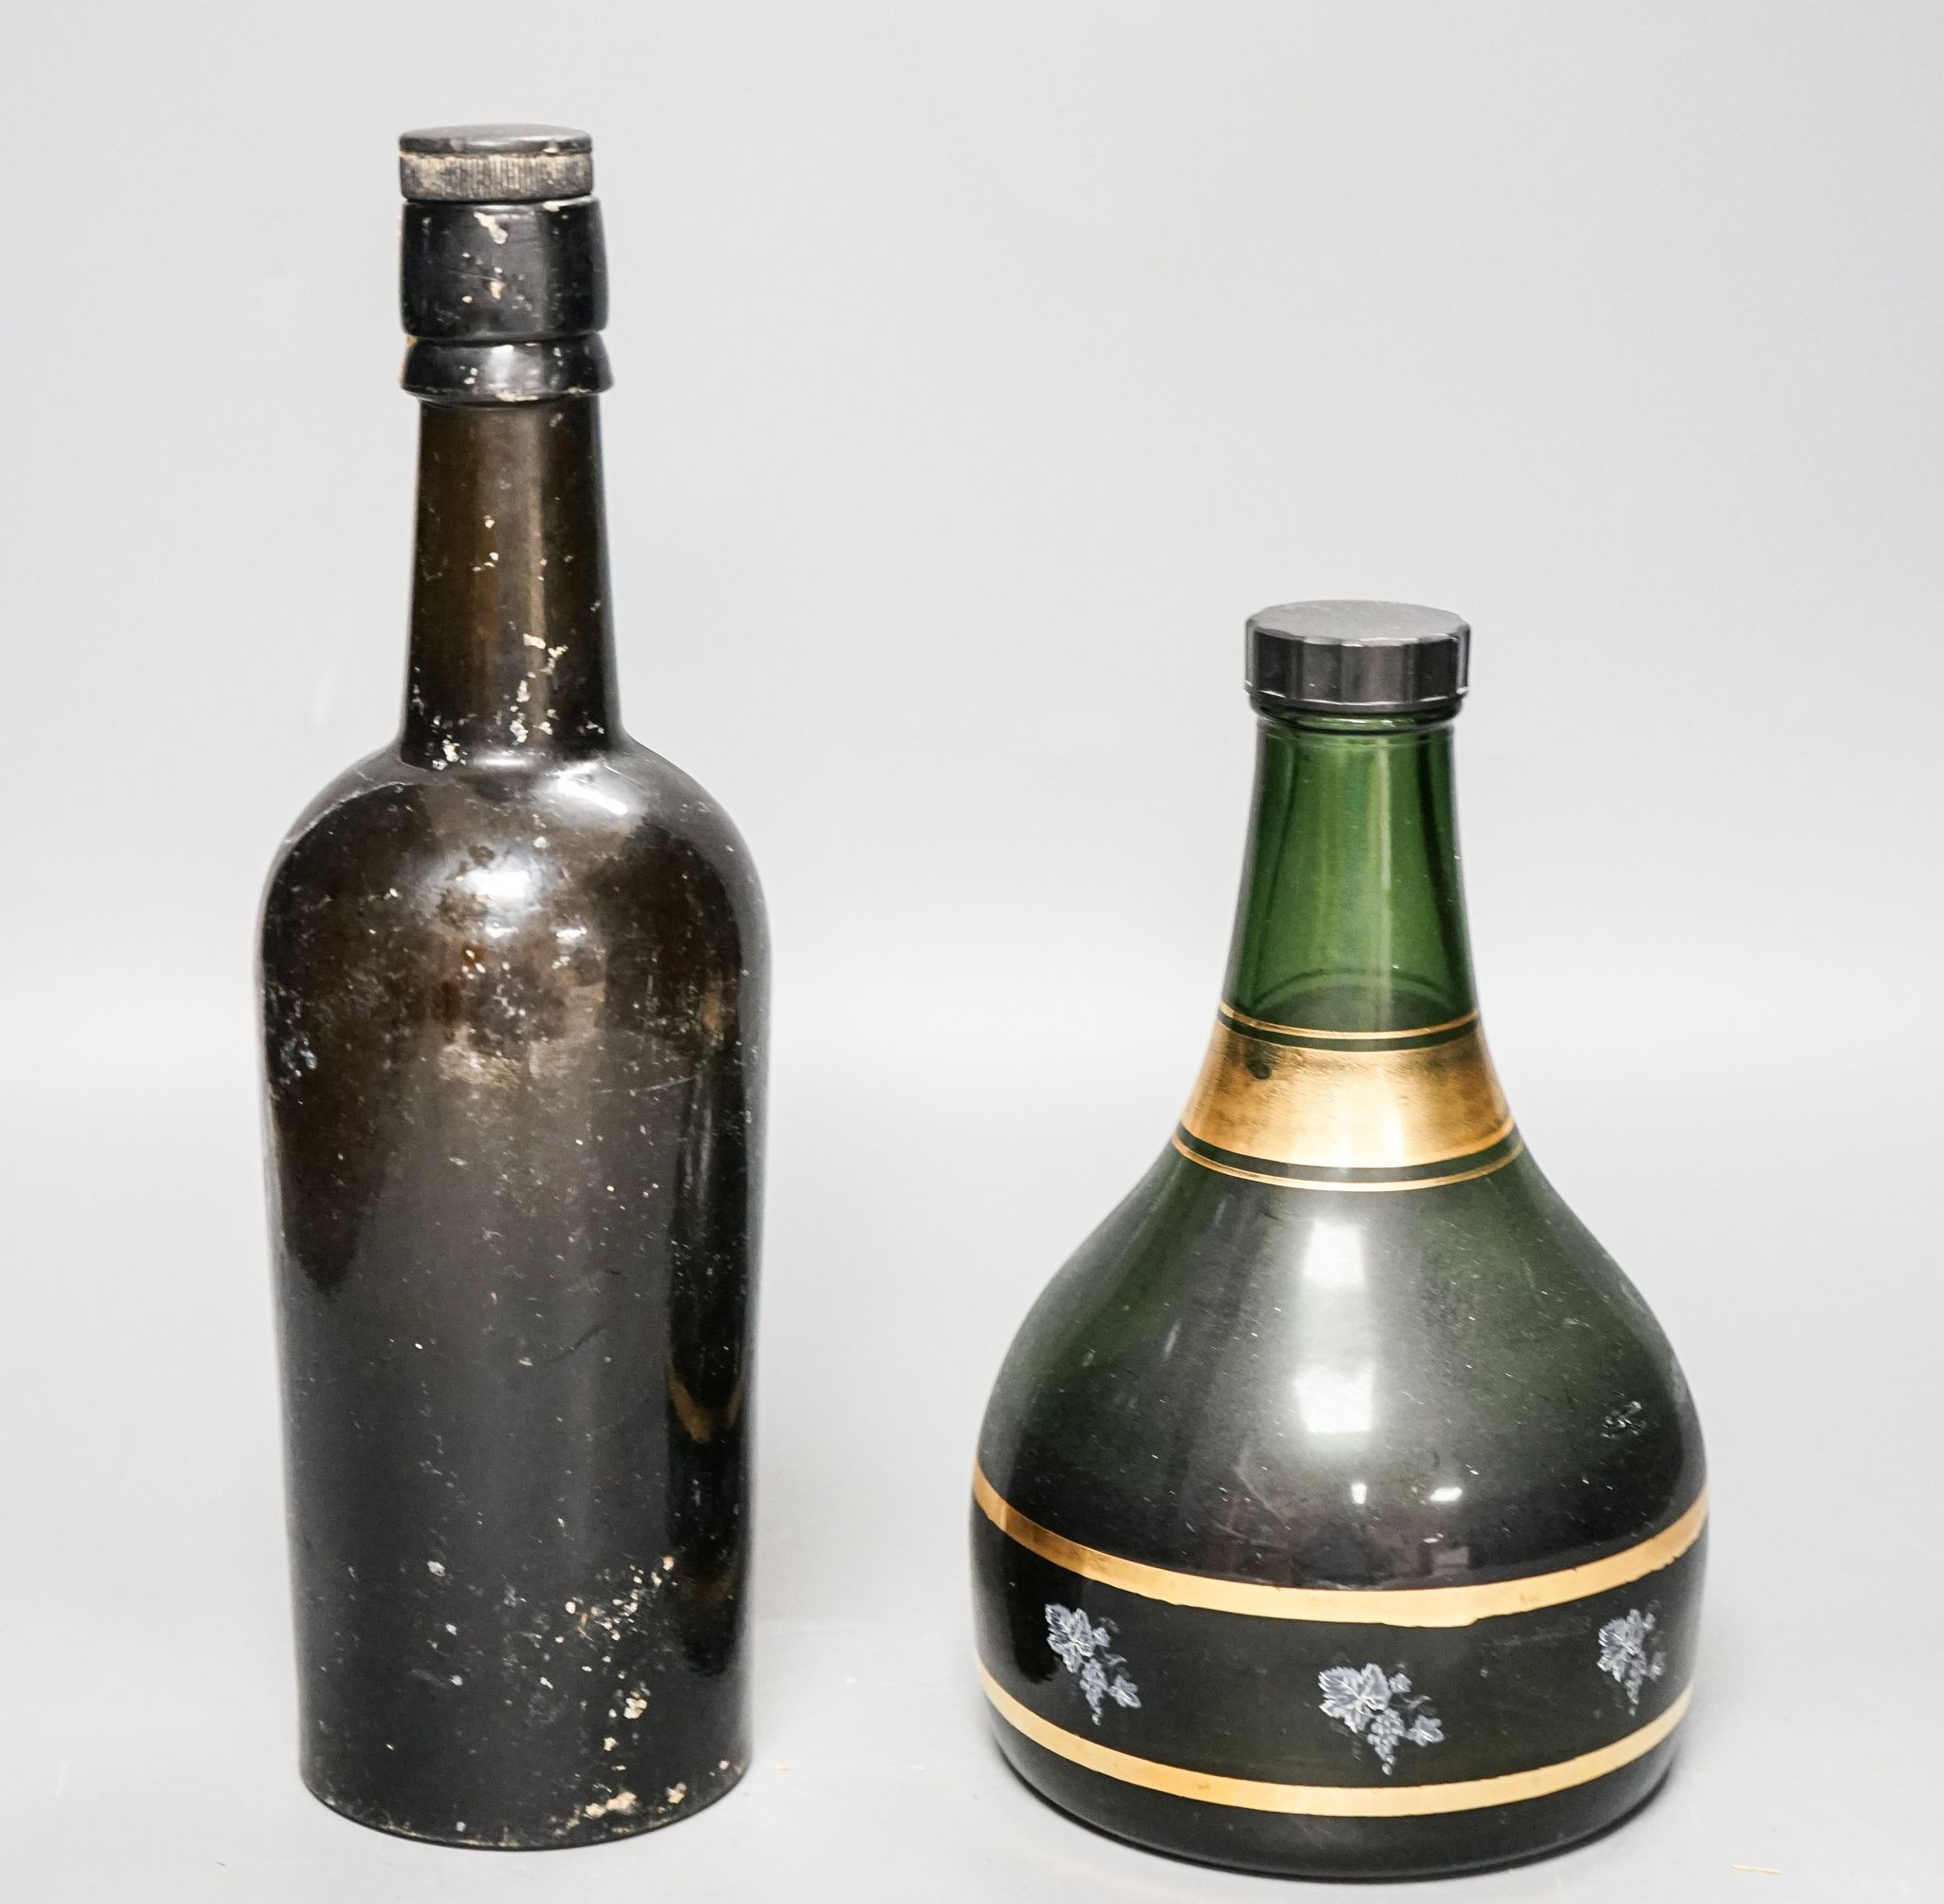 An old Fremlin of Maidstone beer bottle and an old Gregory Scotch whisky musical bottle